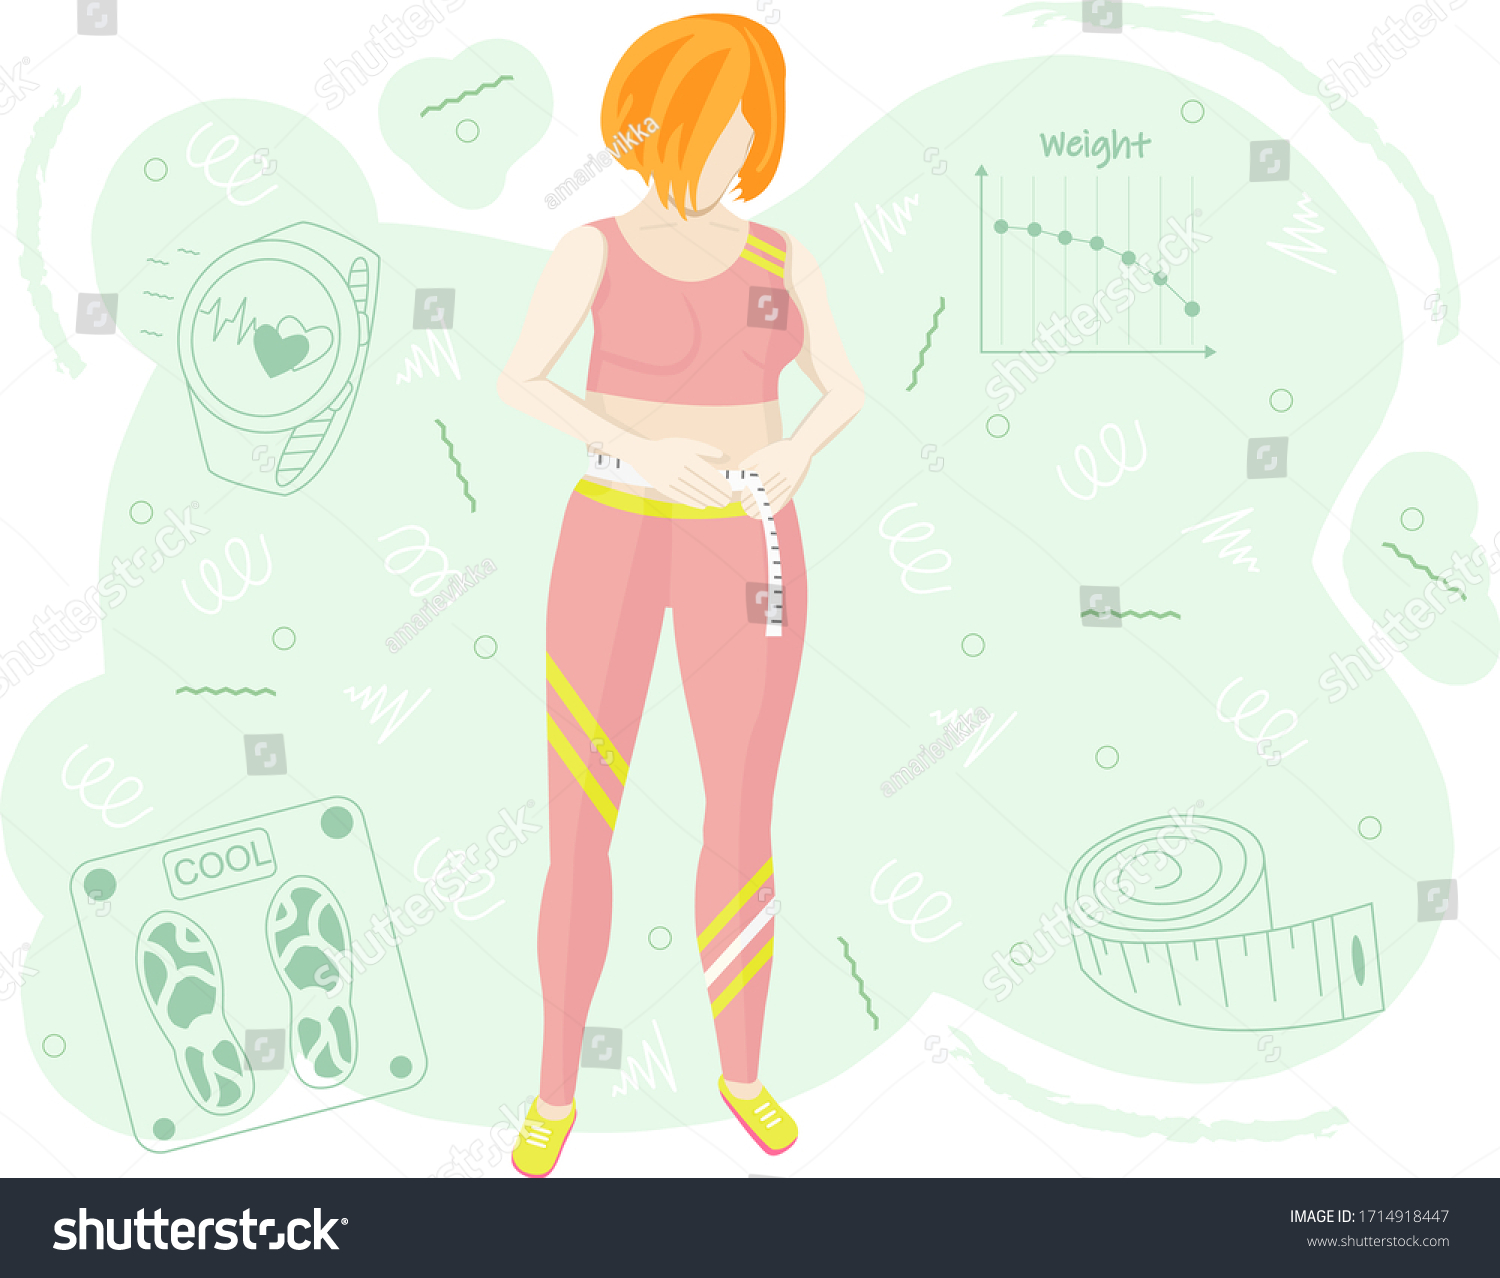 SVG of Vector illustration of a chewing gum that is losing weight. The girl measures the size of the waist. Proper nutrition and weight loss. Conceptual background on the topic of weight loss. svg